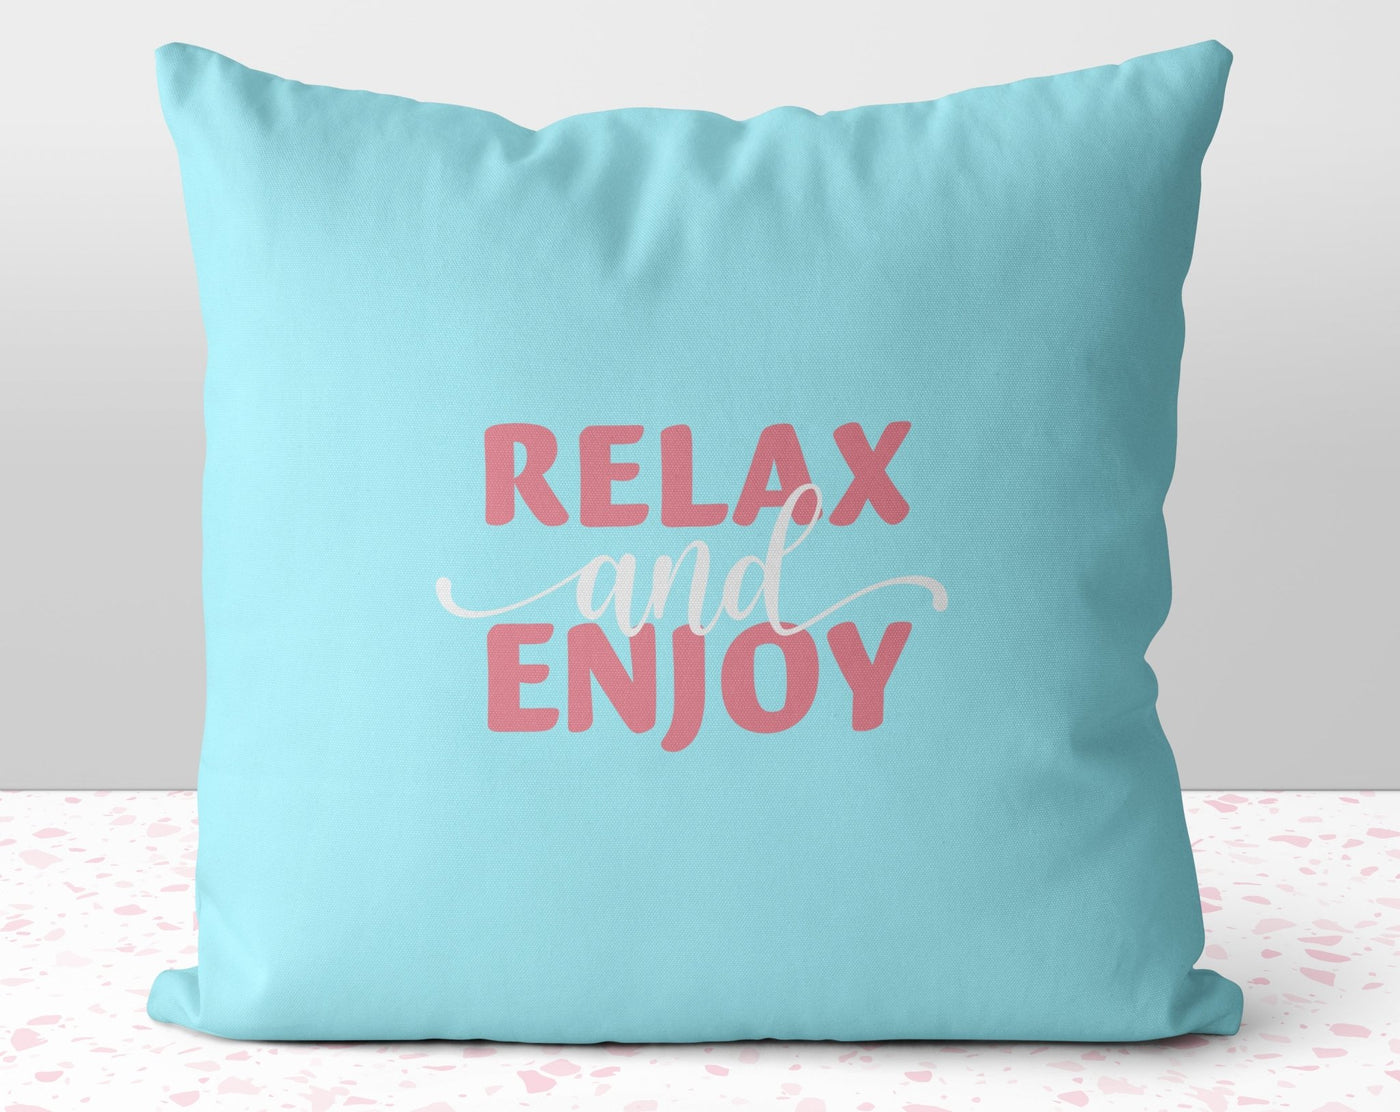 Flamboyance of Flamingos Summer Fun Relax and Enjoy Teal Square Pillow with Cover Throw with Insert - Cush Potato Pillows